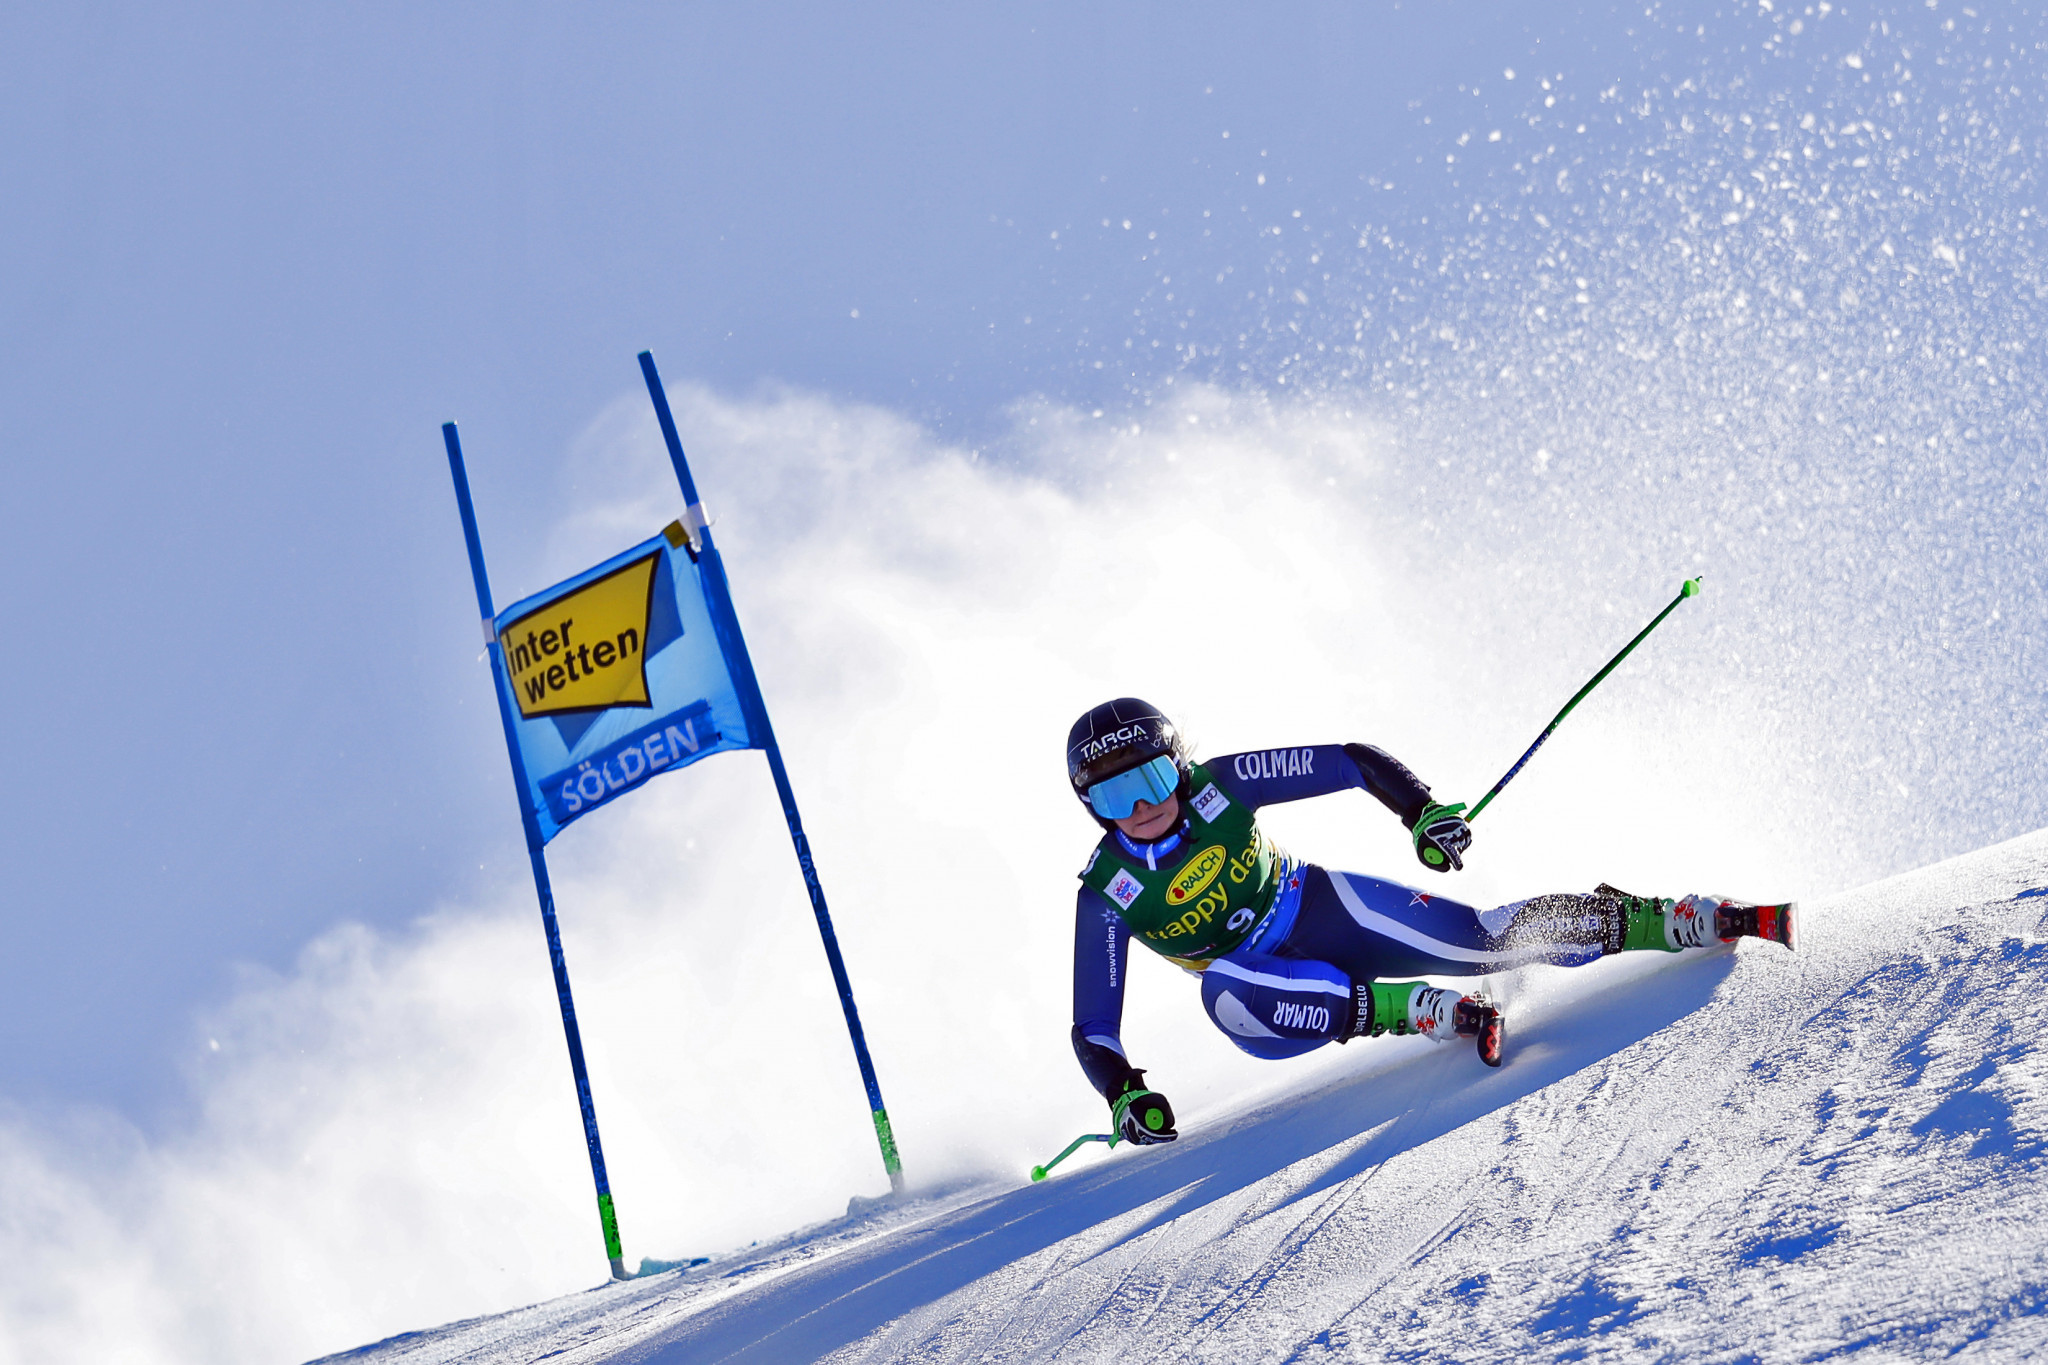 Alexis Pinturault and Alice Robinson, pictured, were victorious in Sölden last season ©Getty Images